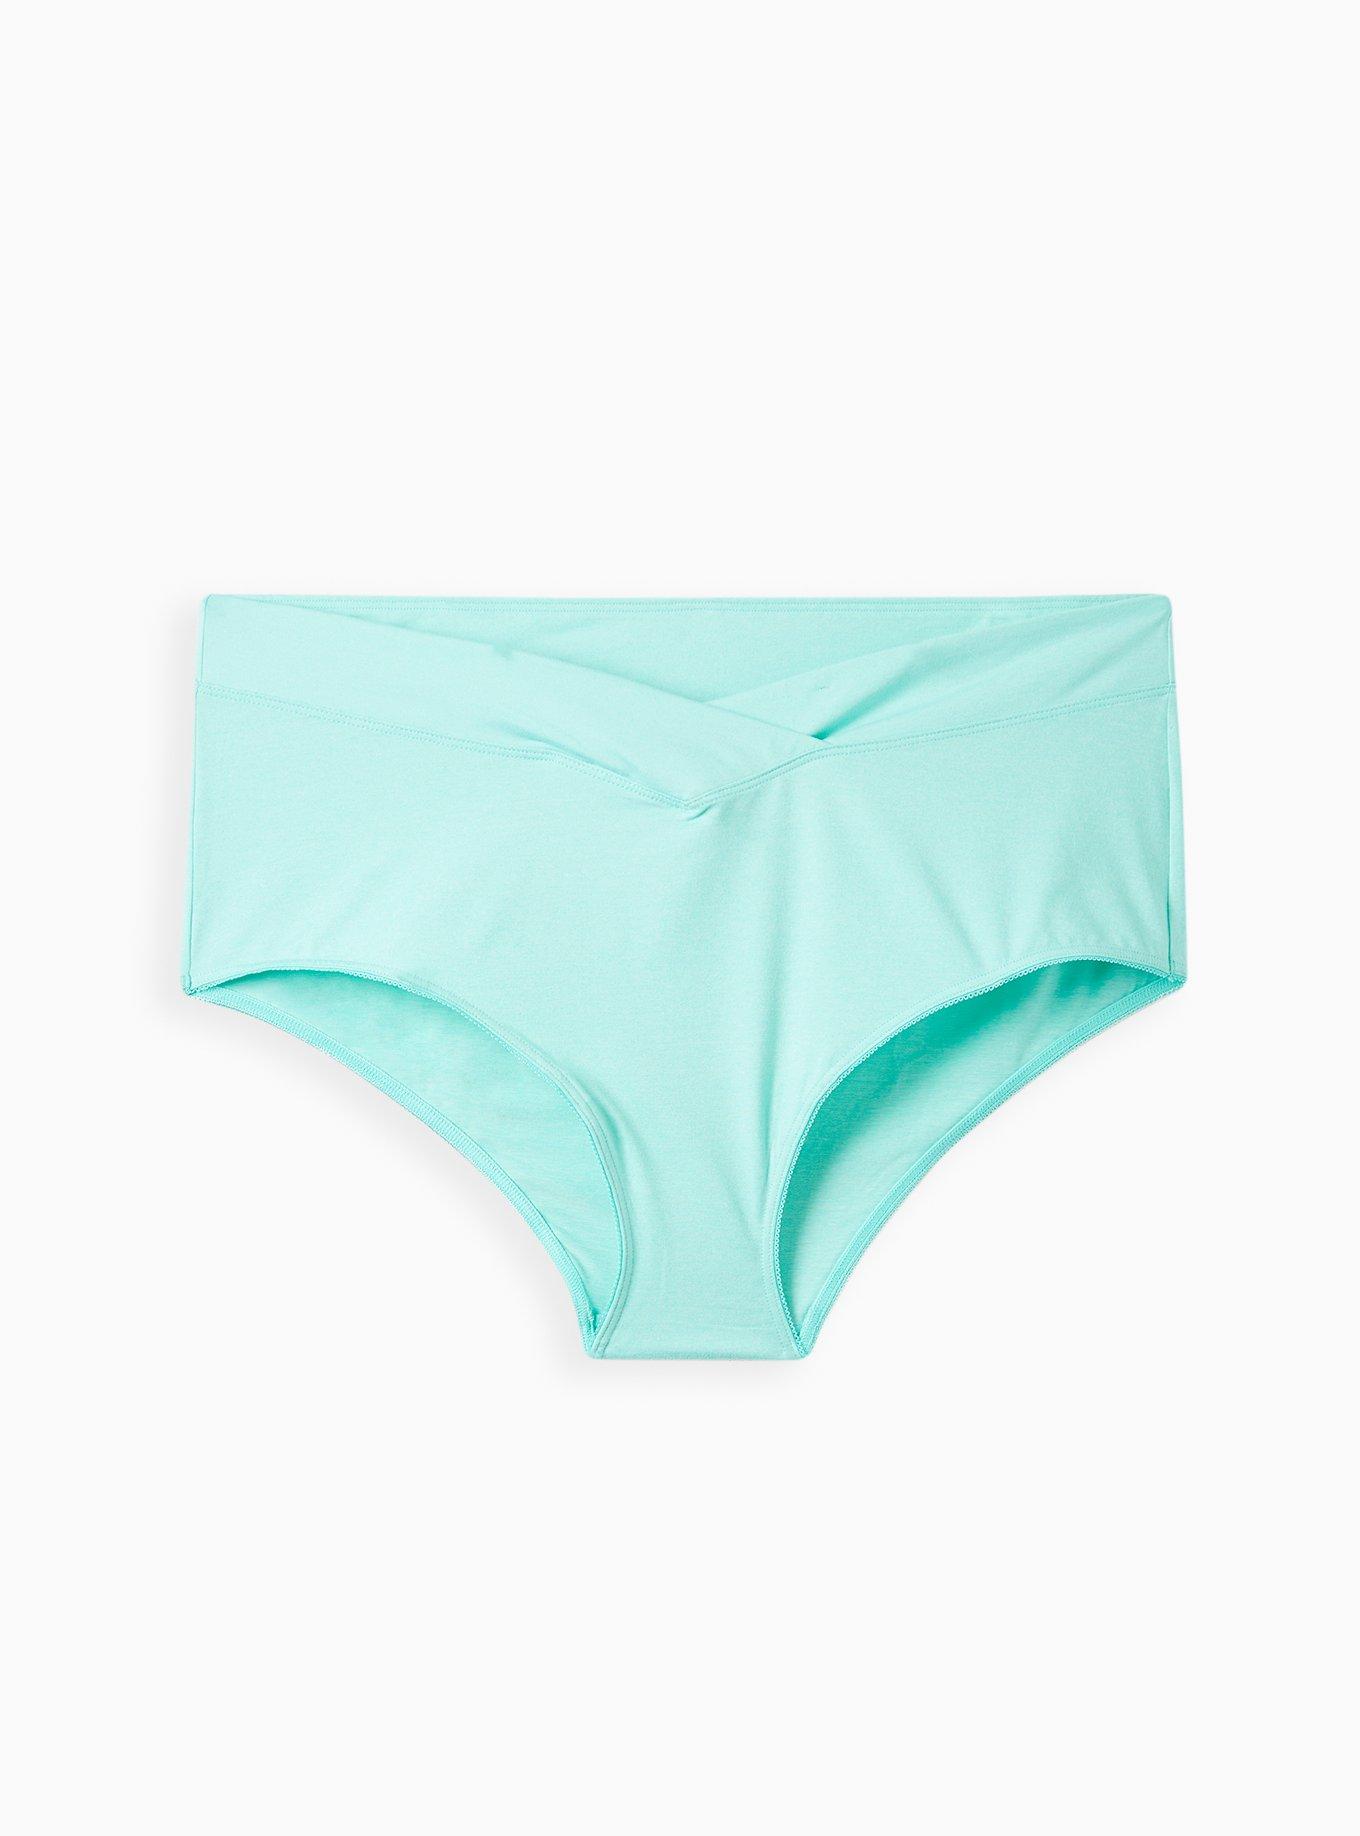 The Period Company The Sleeper Period Underwear  Urban Outfitters Taiwan -  Clothing, Music, Home & Accessories